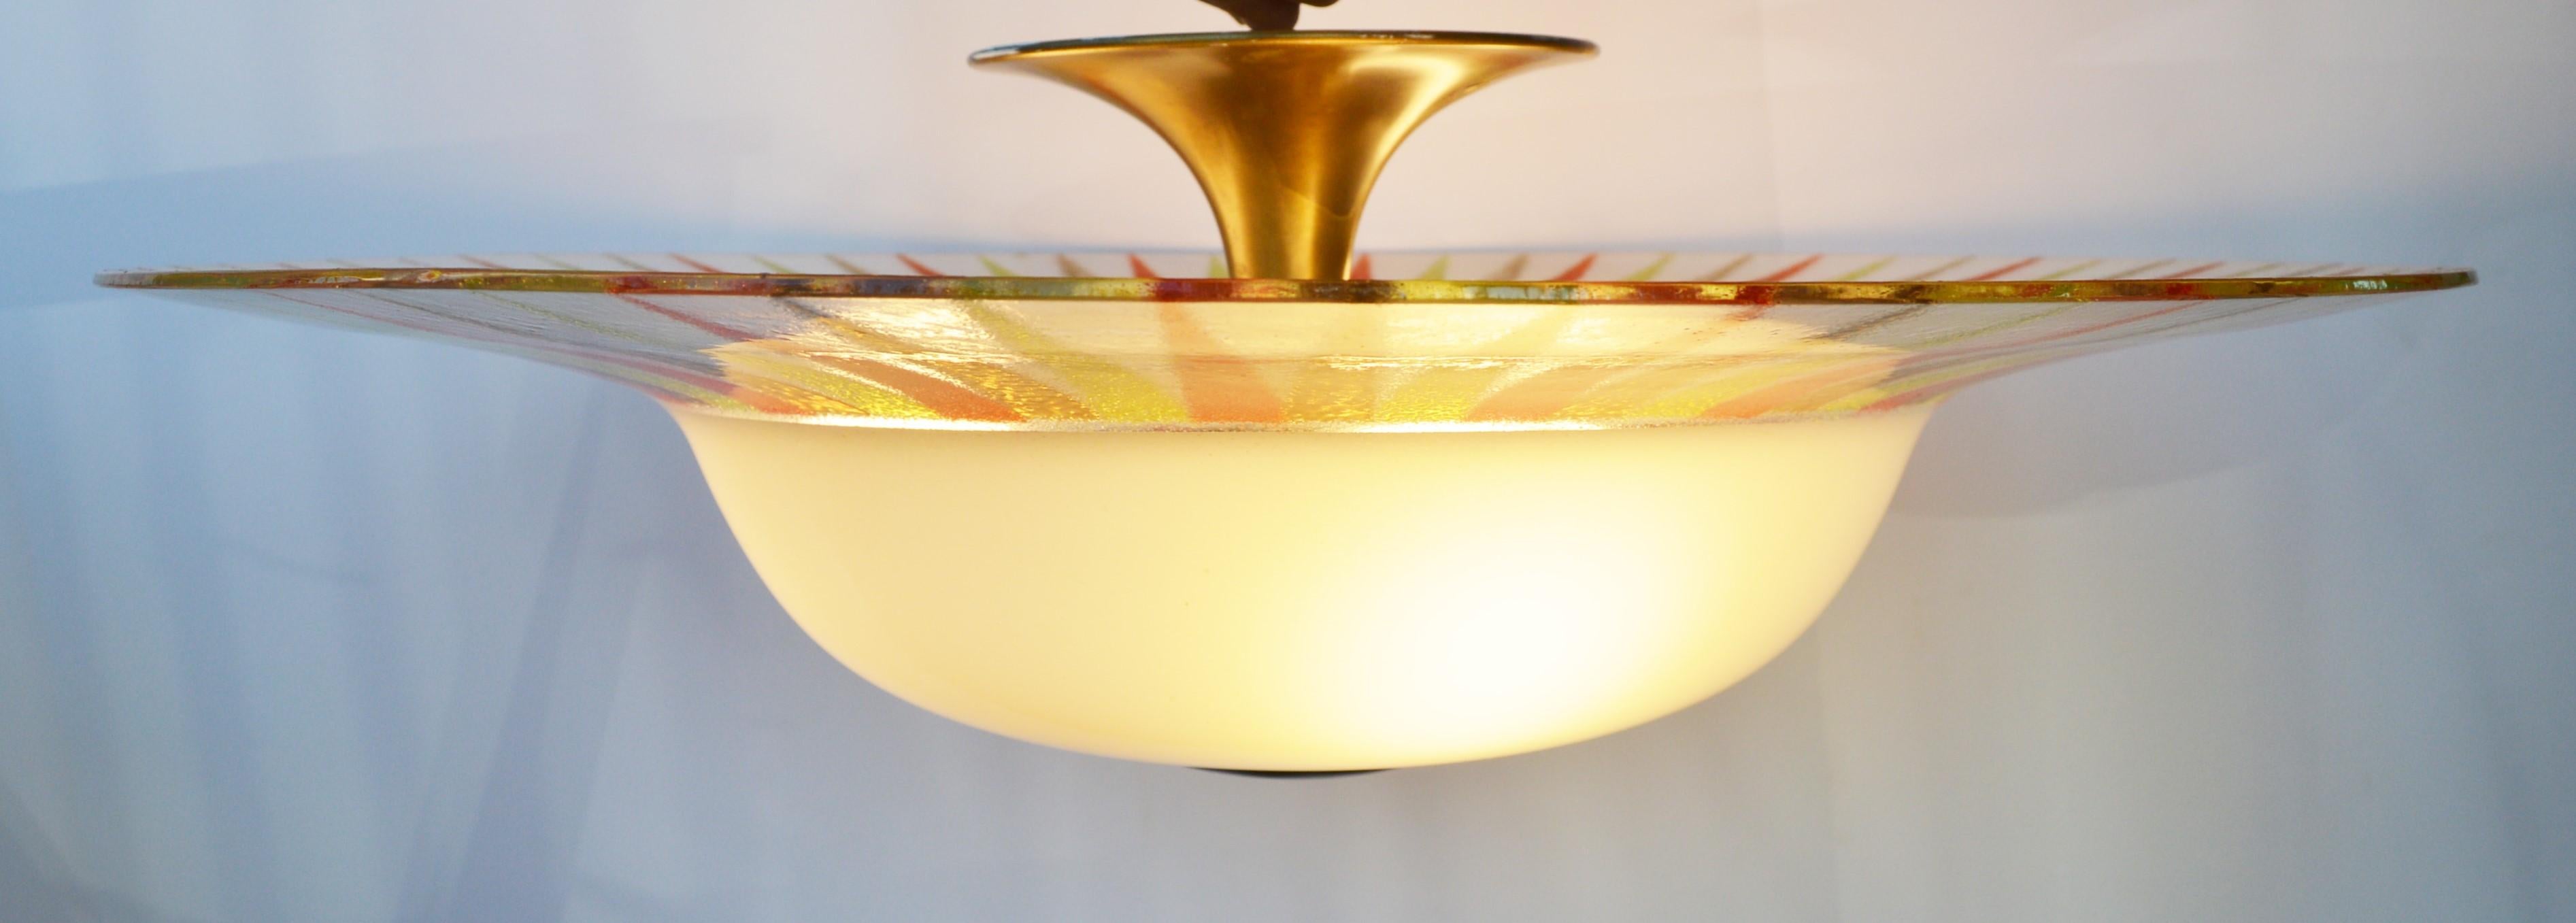 This rare and super dramatic light was designed by Gerald Thurston for Lightolier and still retains the original label as well as an etched number. In amazing condition, with no chips or damage to the glass, Lightolier devised a wonderful technique